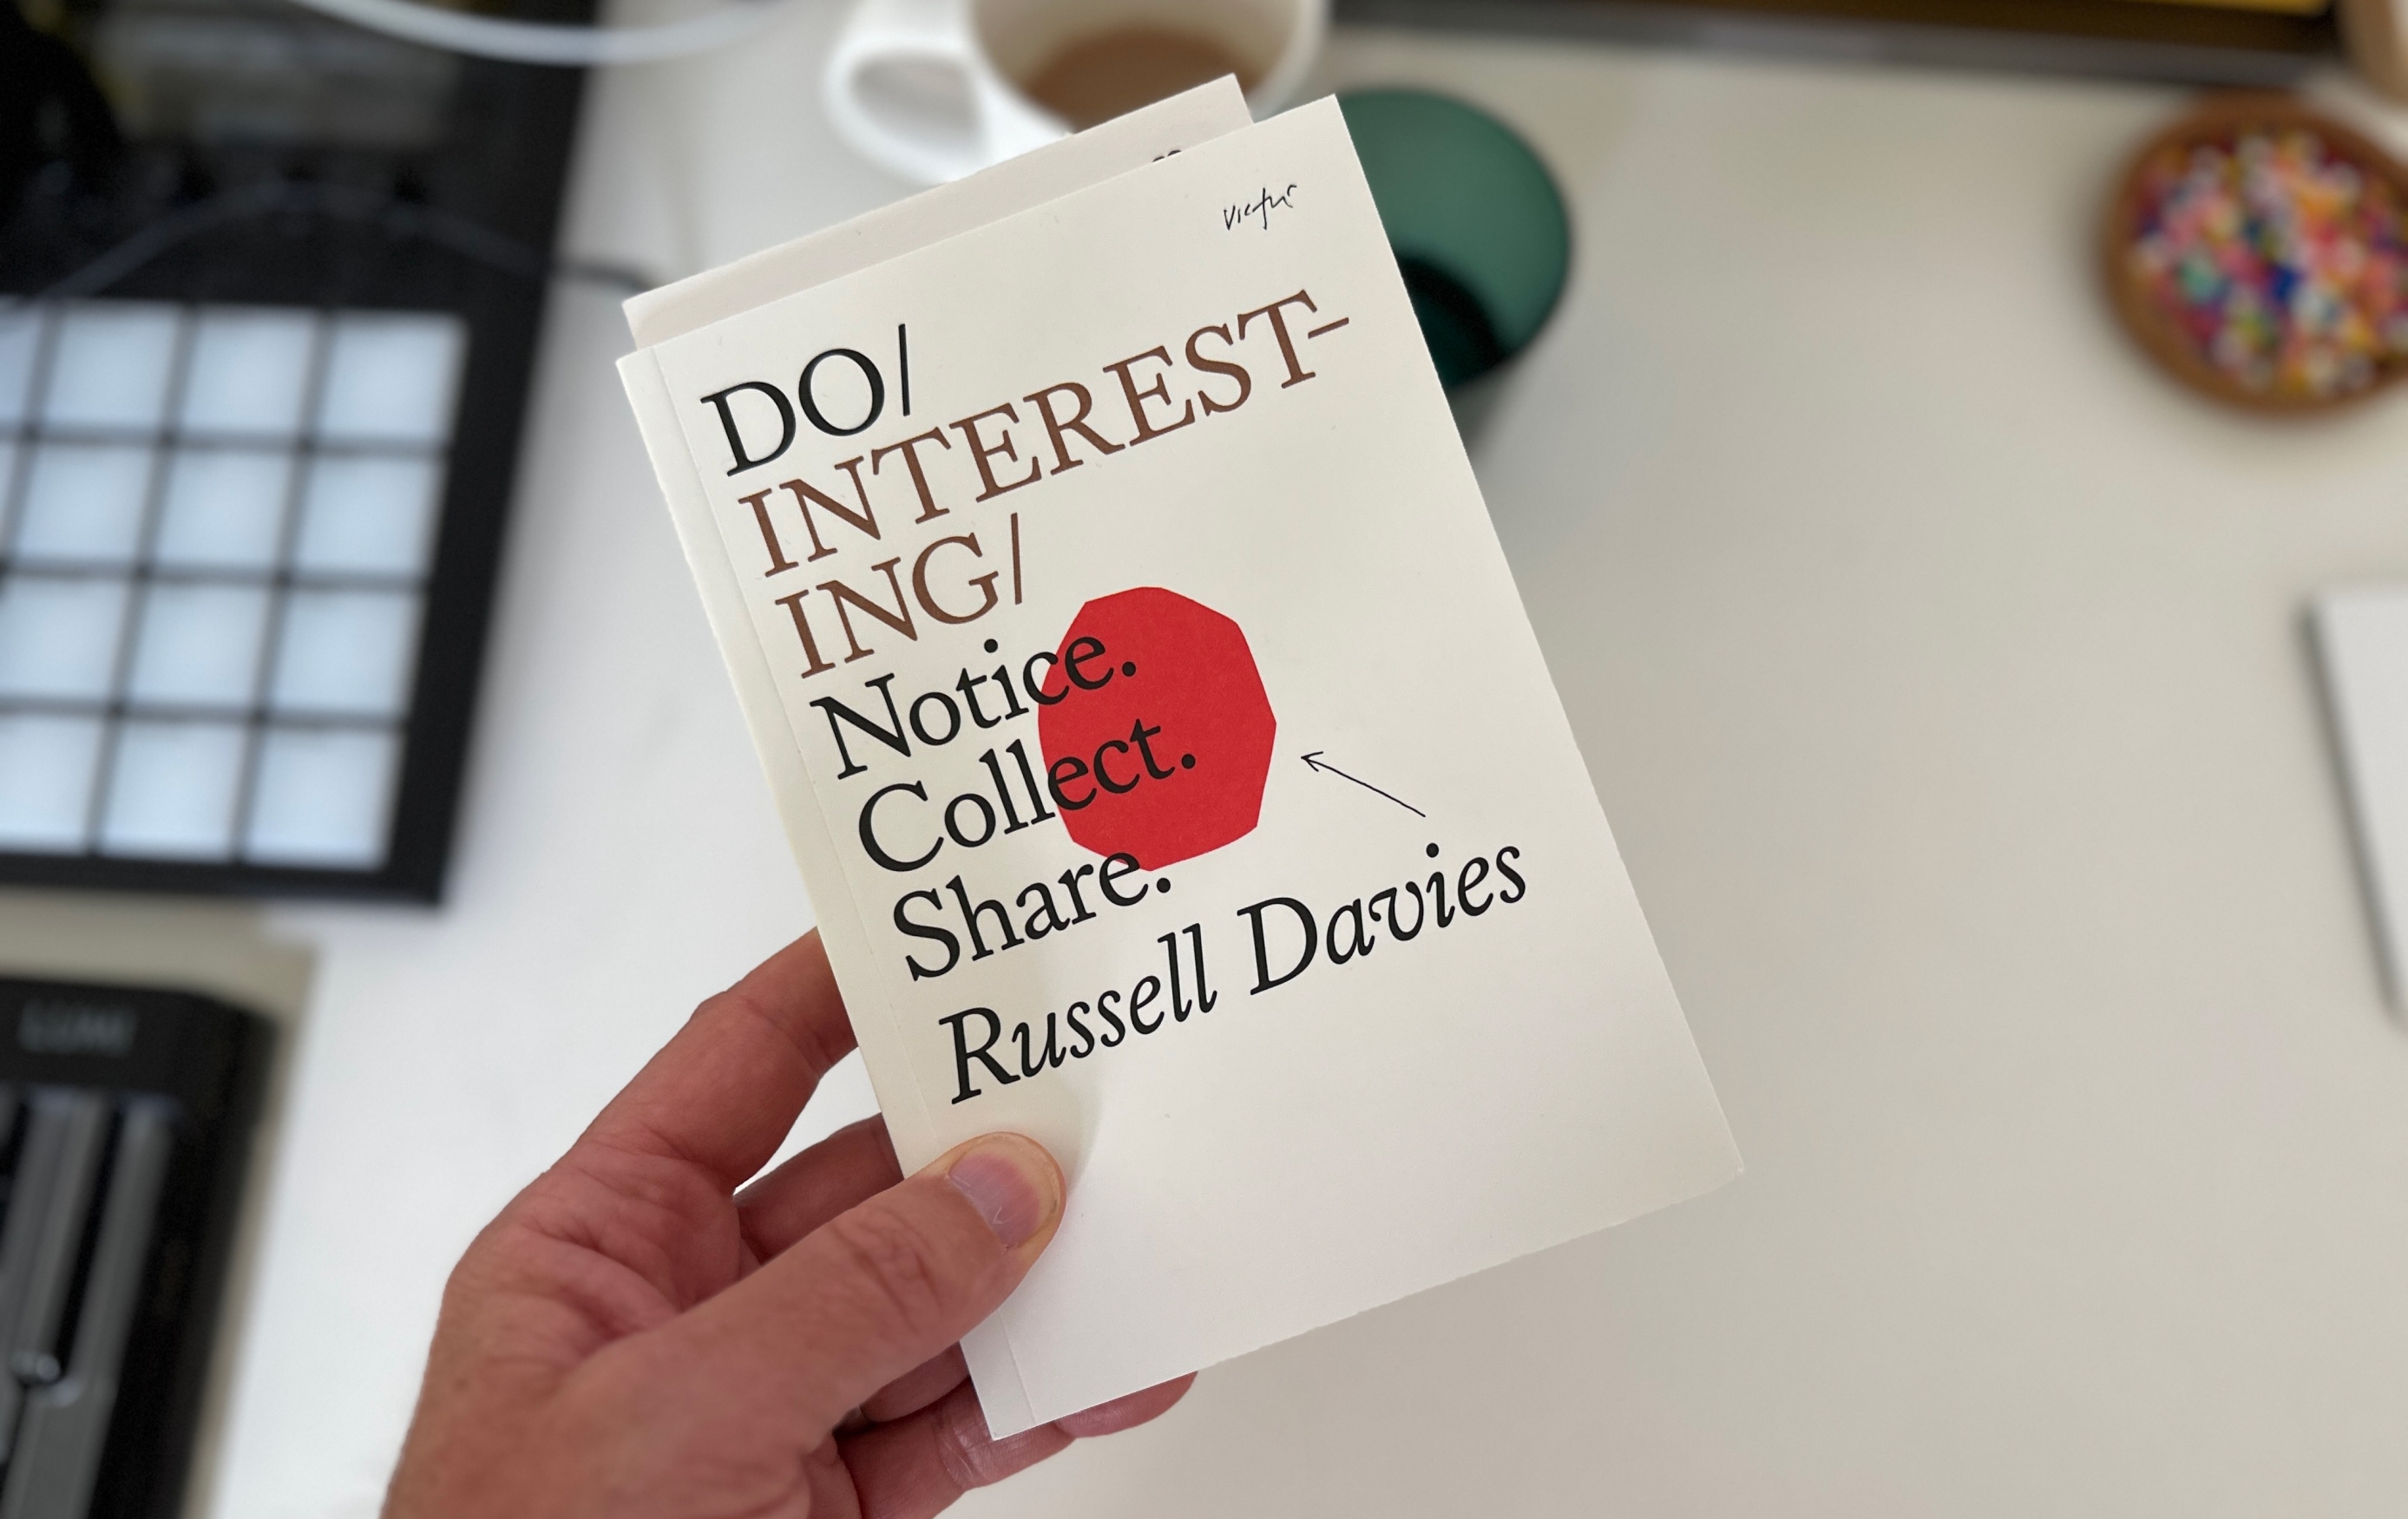 Do Interesting. Notice. Collect. Share. A book by Russell Davies